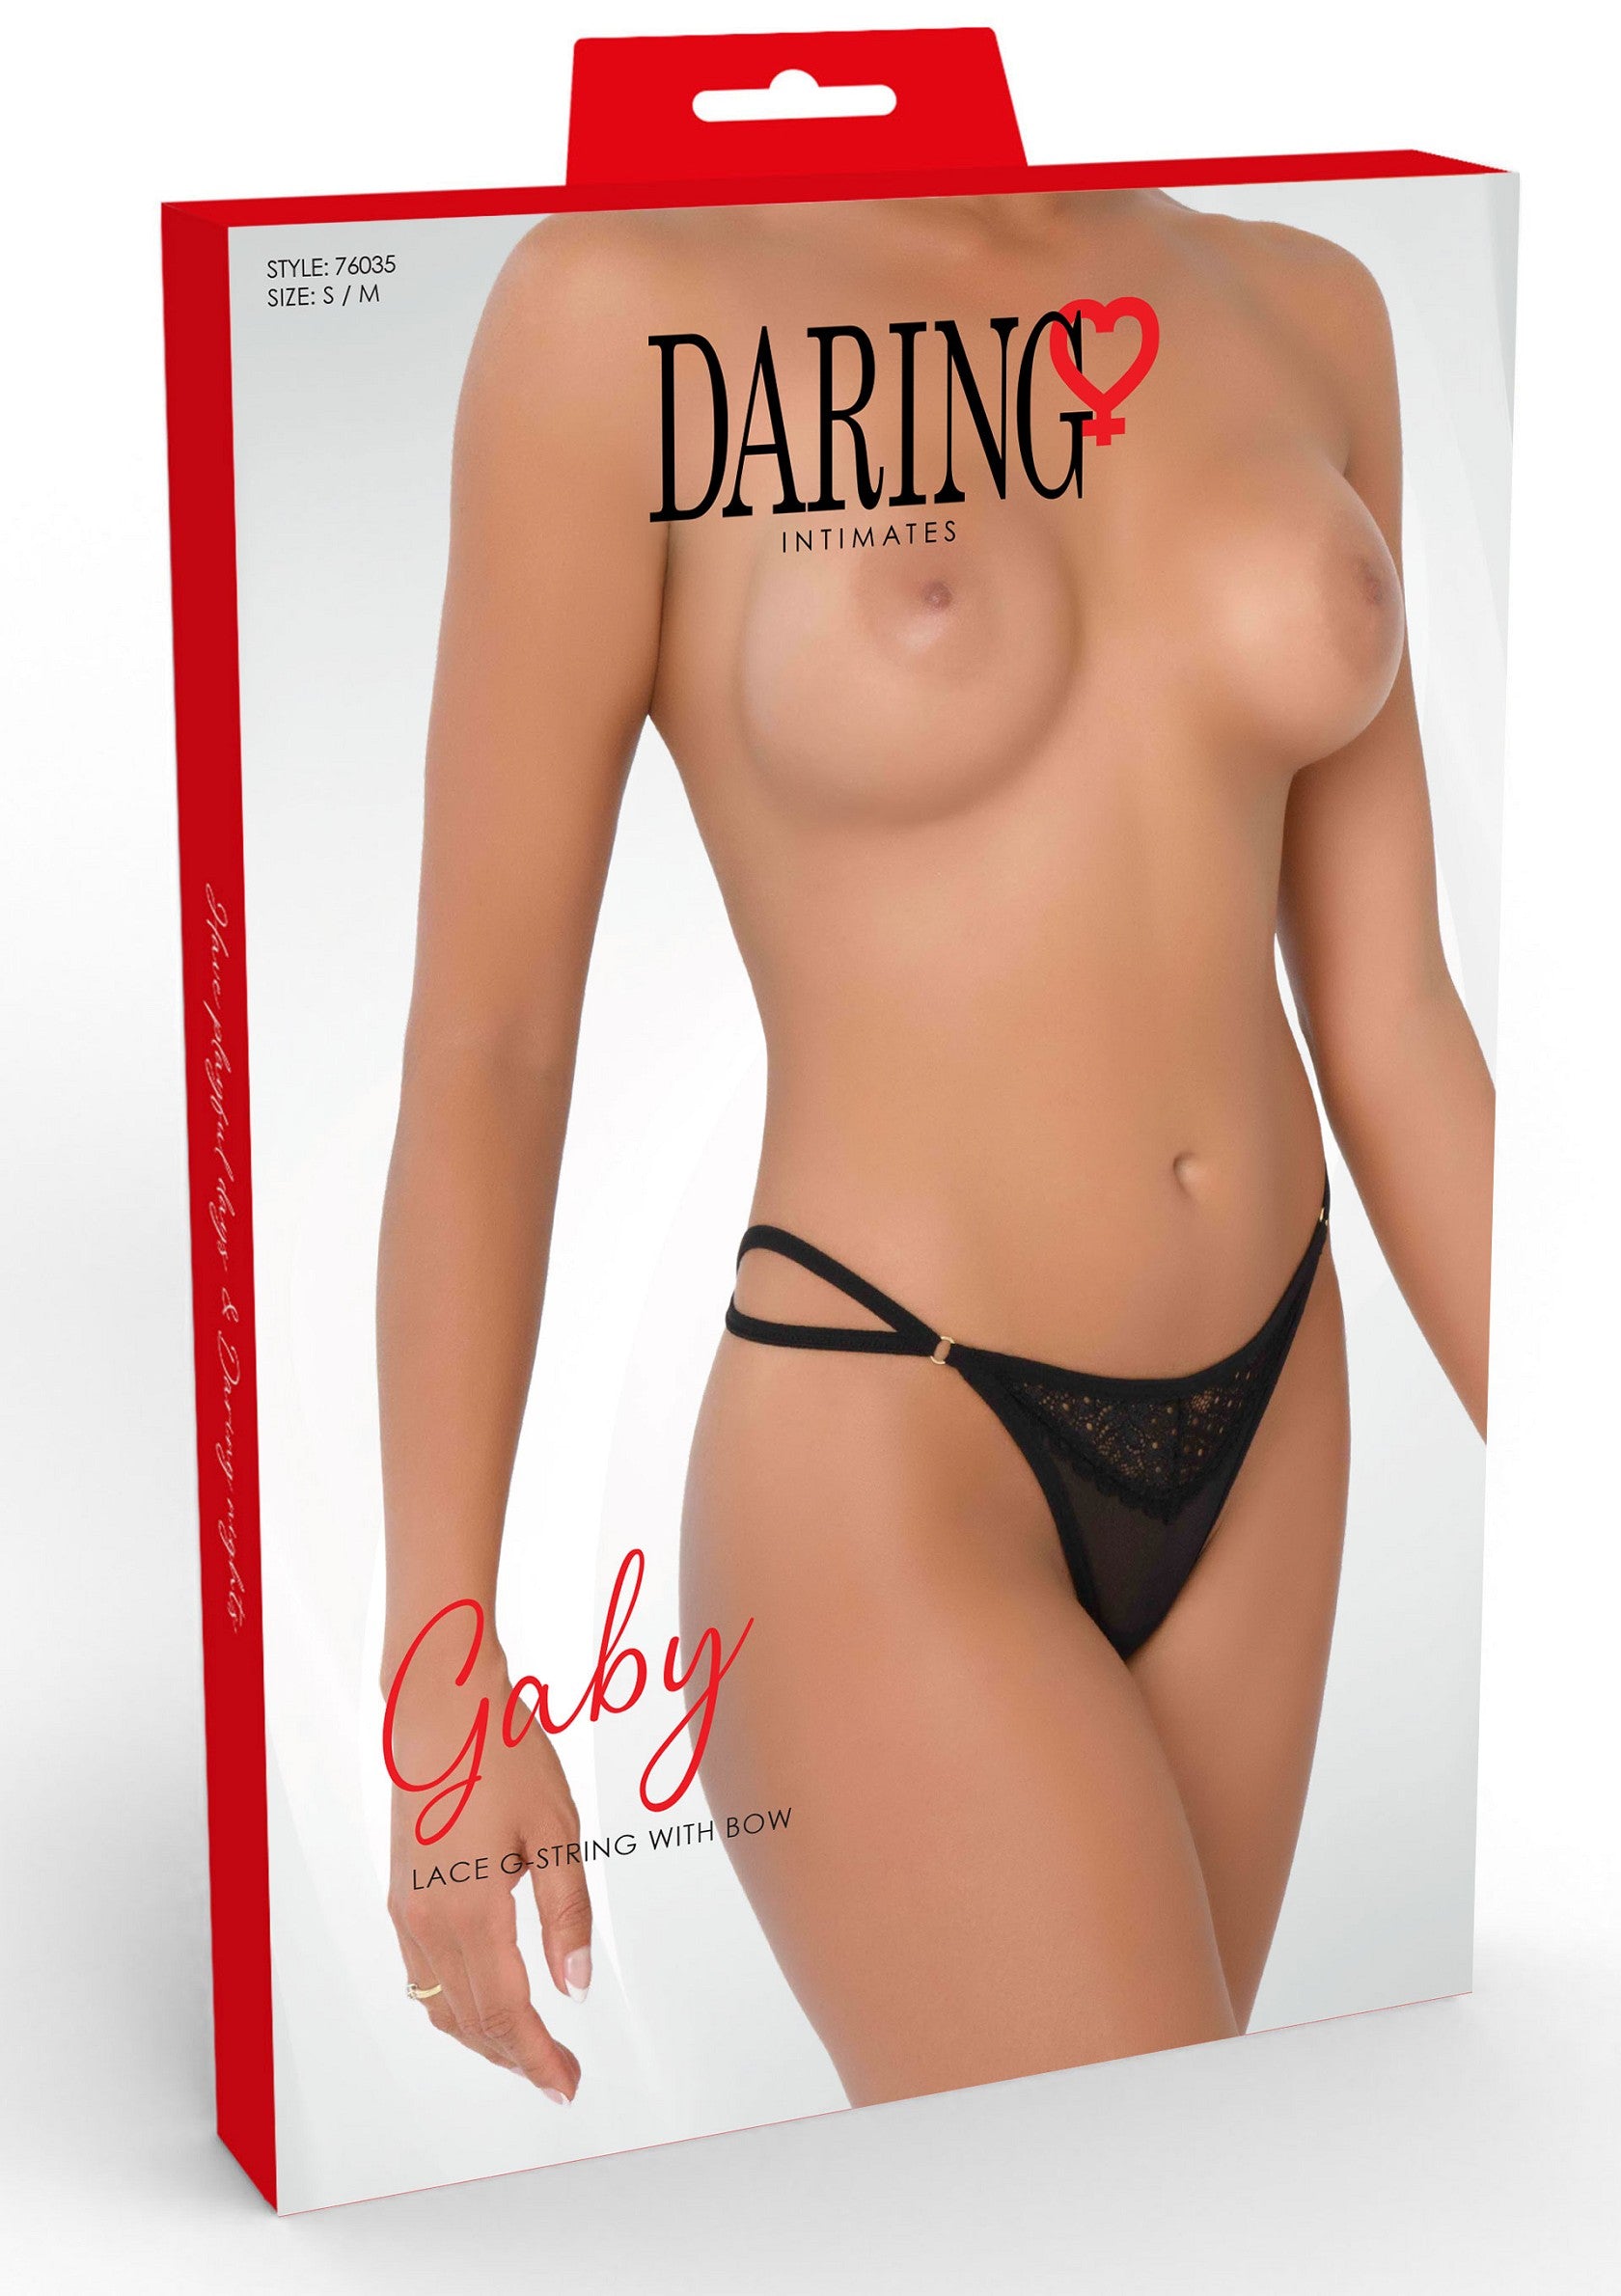 Daring Intimates Gaby Lace G-String With Bow BLACK S/M - 0